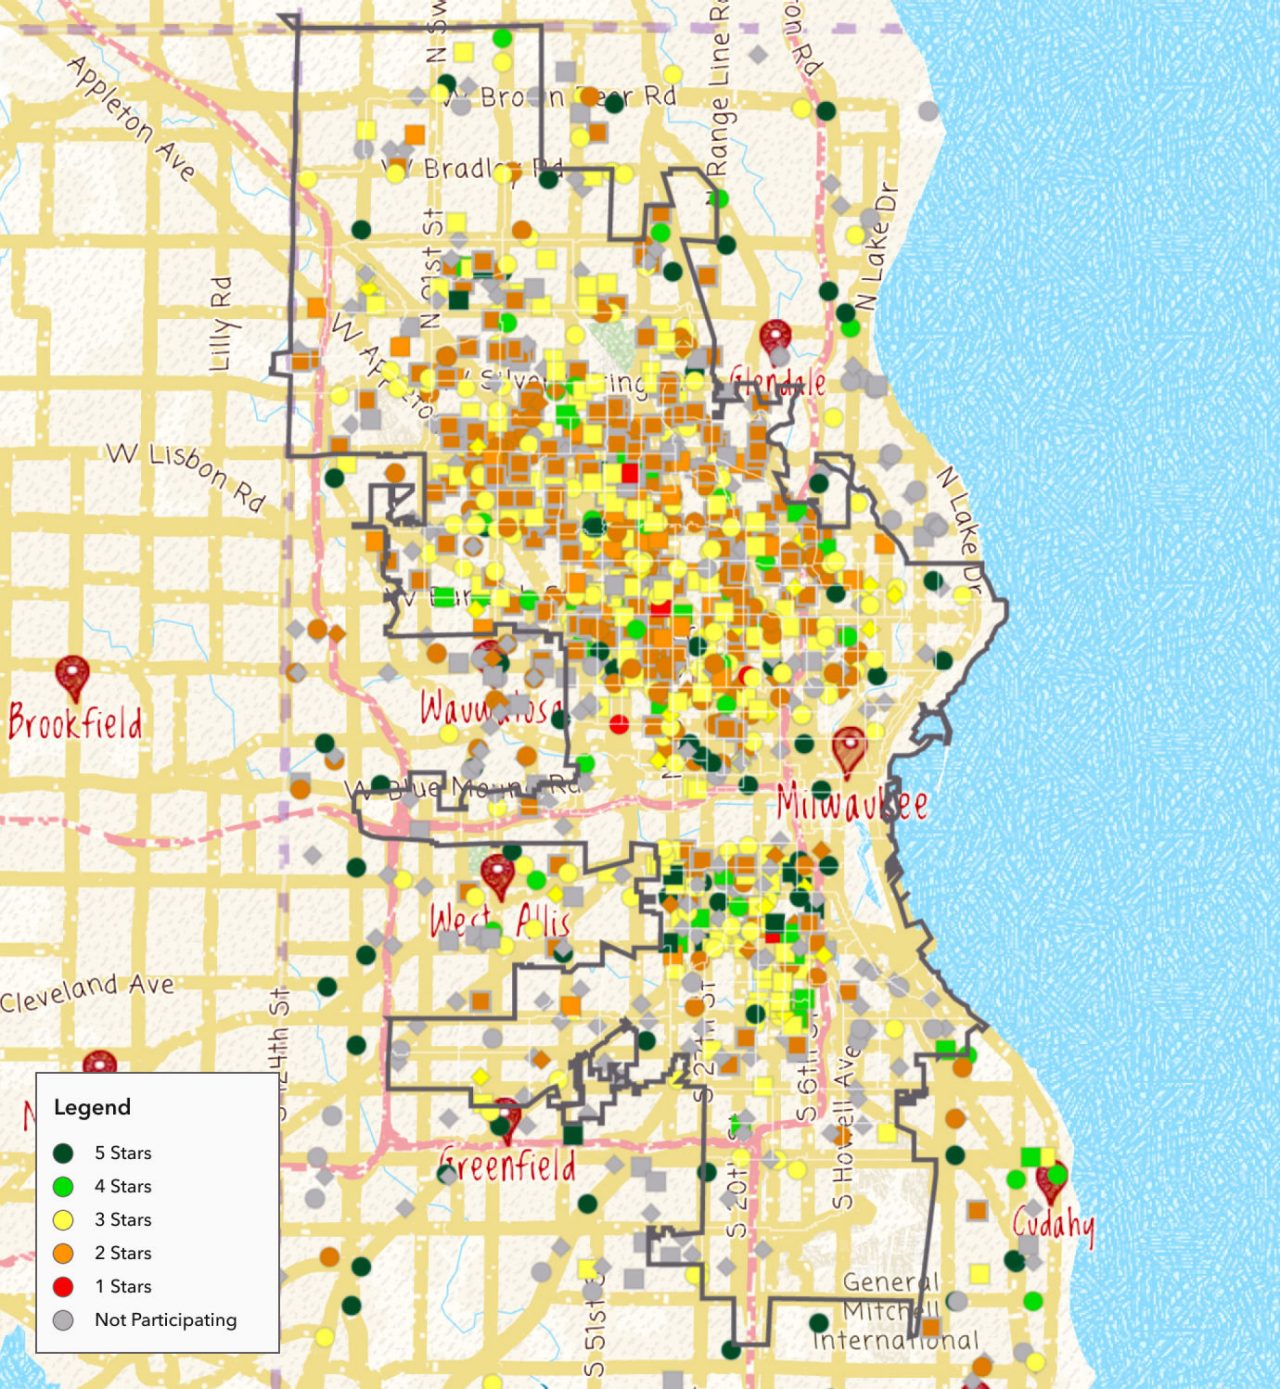 This ArcGIS Online map displays Wisconsin's rating and improvement system scores for ECE programs. This map provides families with a snapshot of program ratings in their neighborhood.